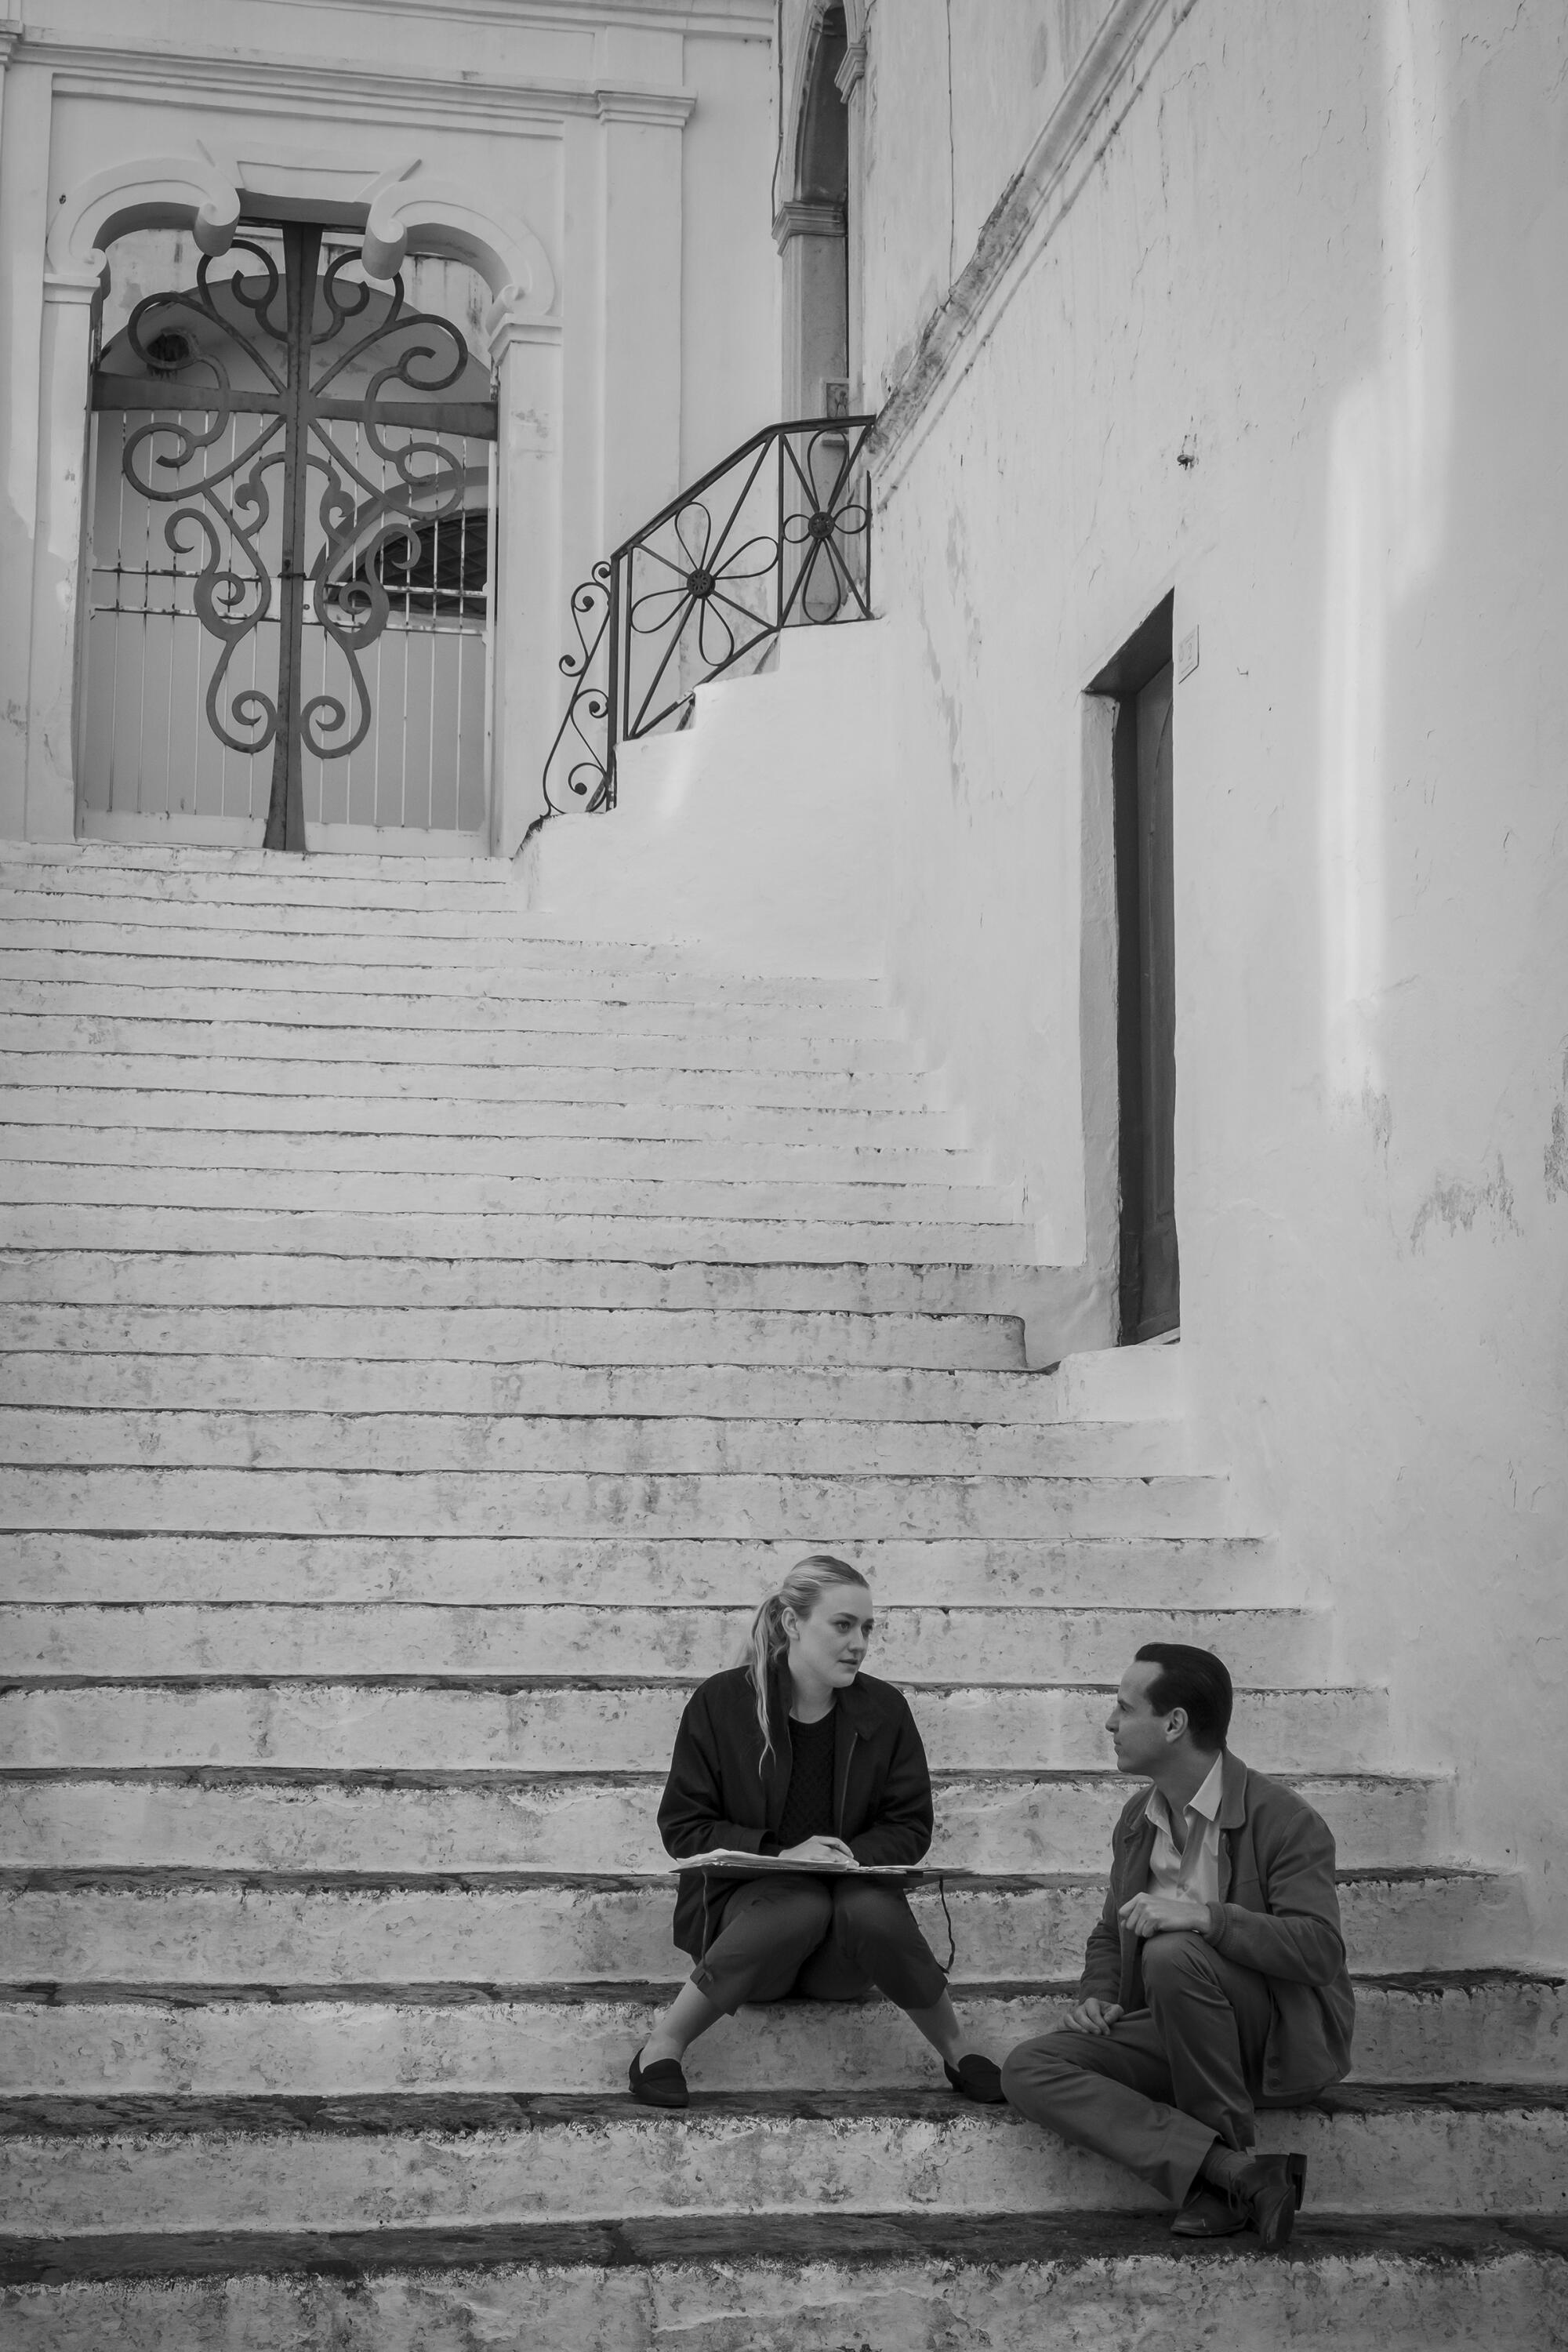 A man and woman sit on outdoor steps in a scene from the black-and-white "Ripley."